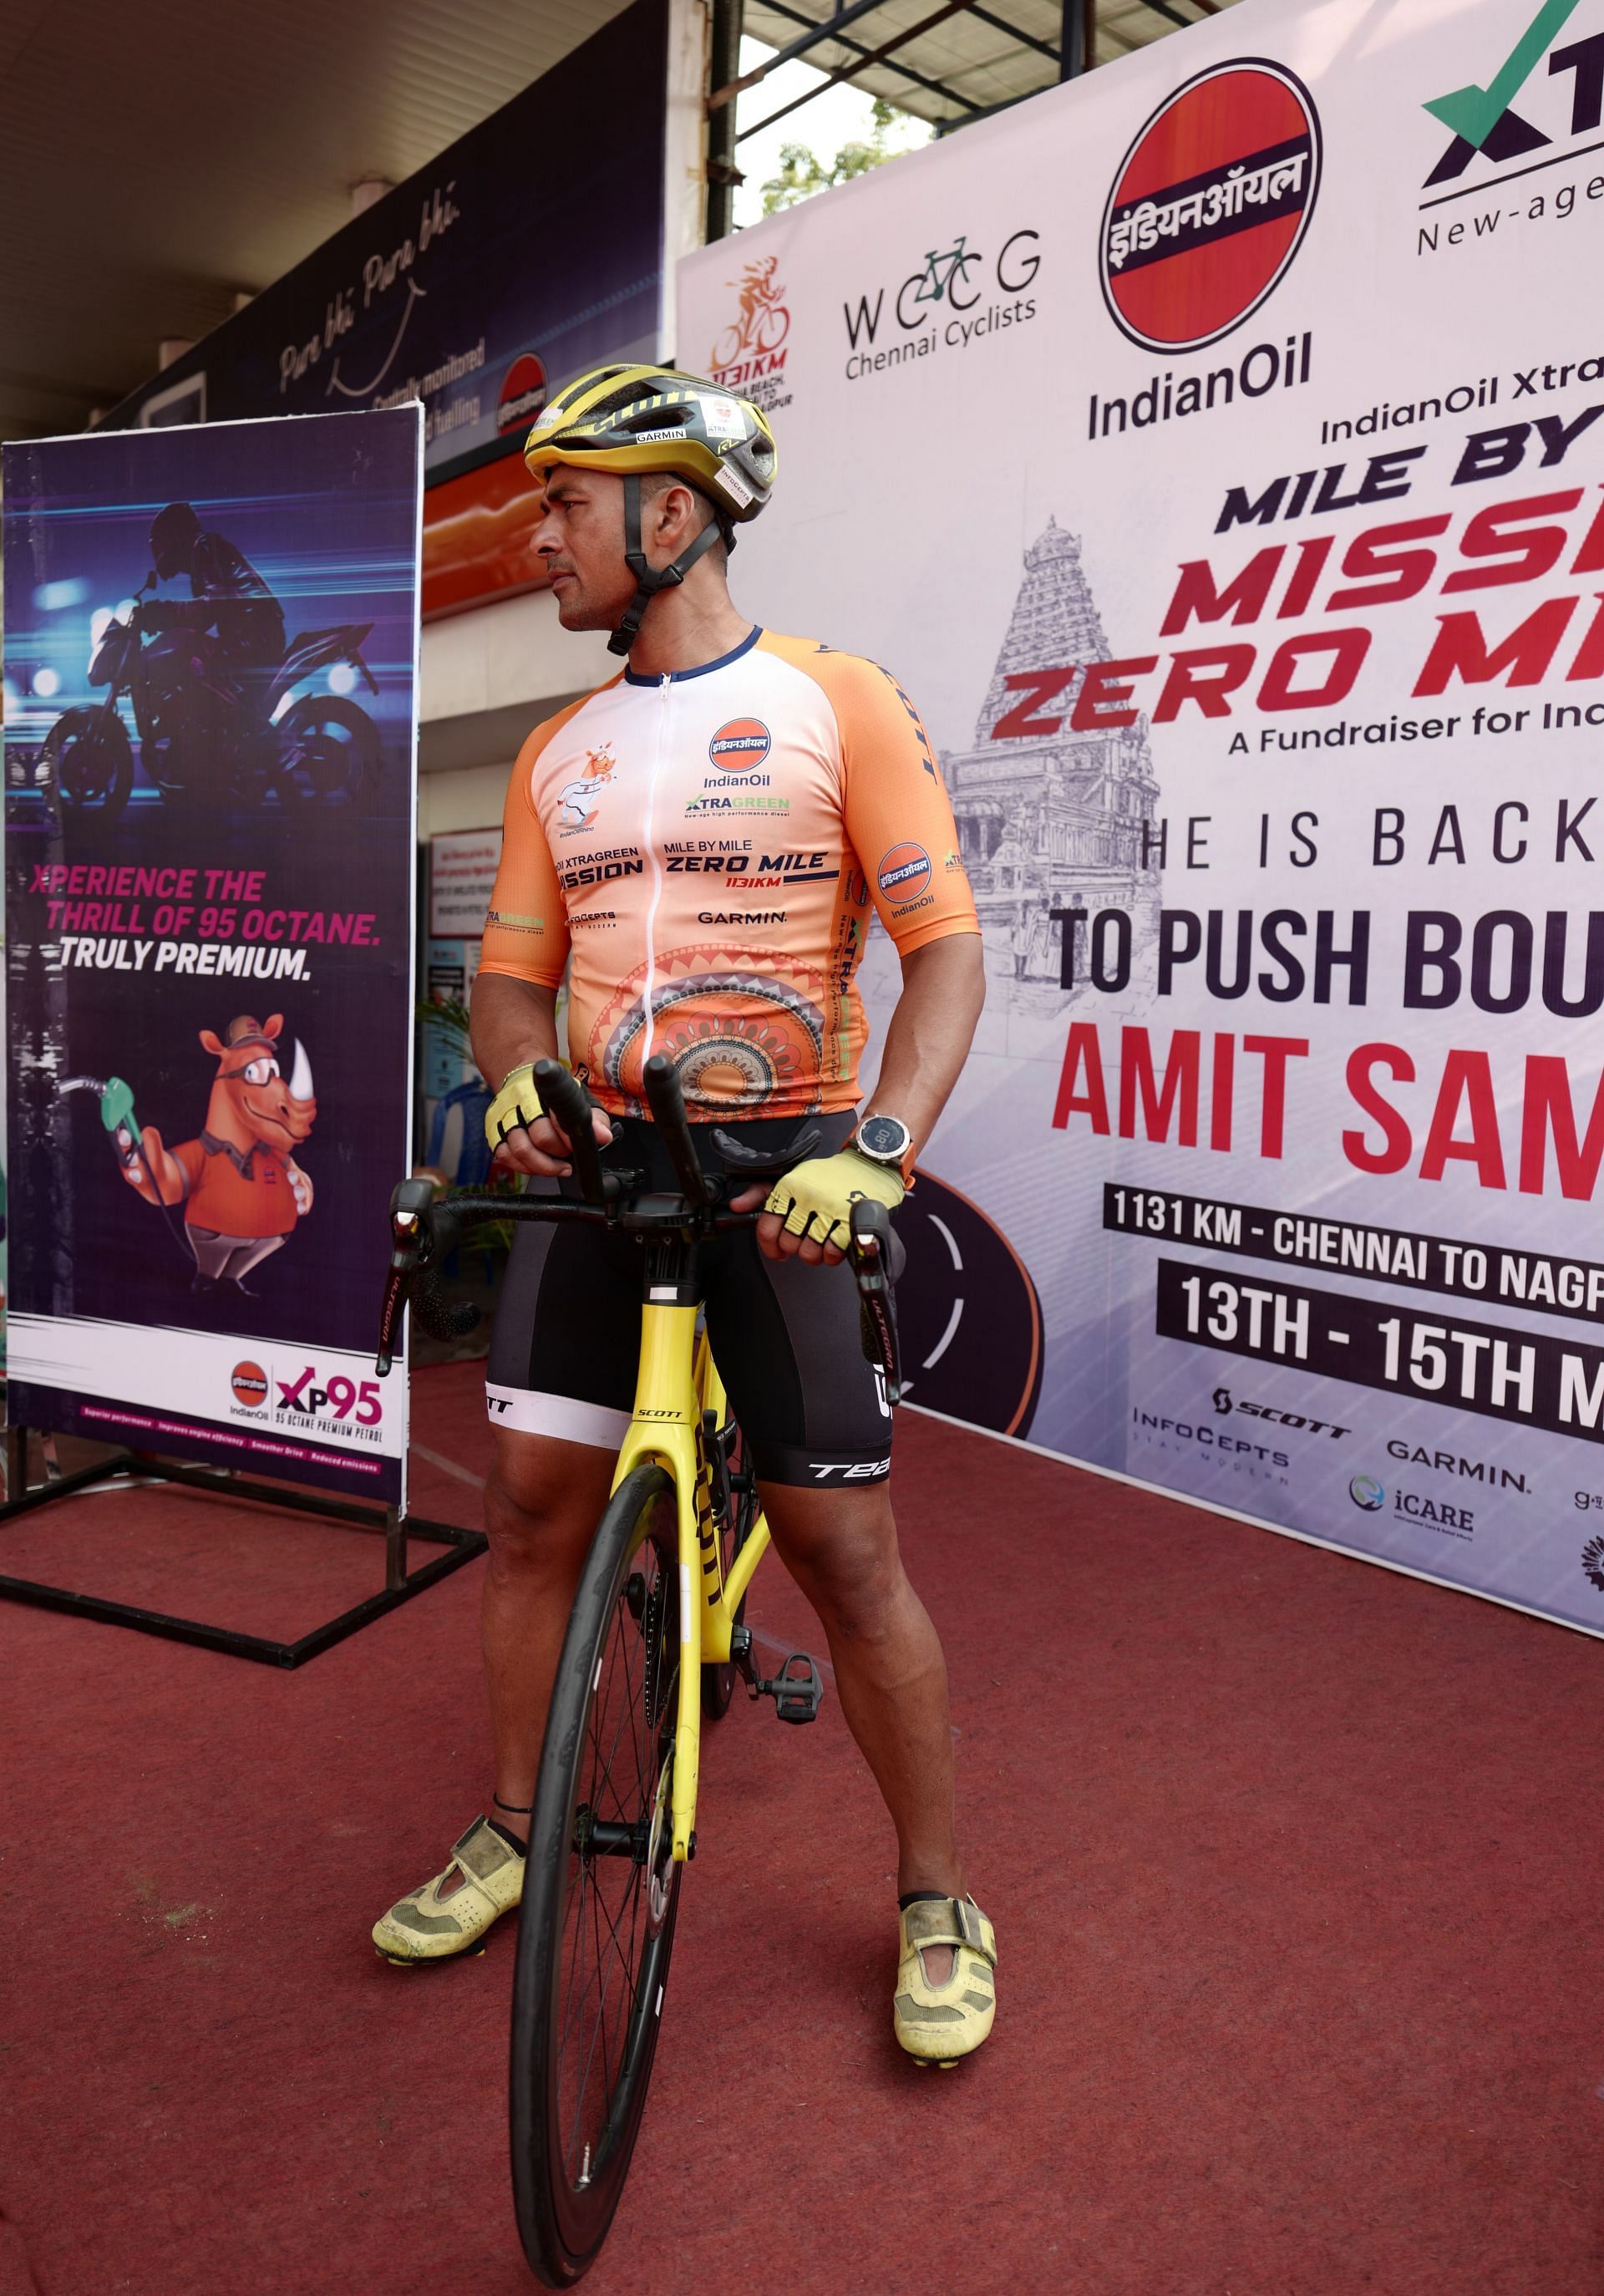 Amit Samarth will start at 10 pm on March 13 from Light House Marina Beach, Chennai, and is expected to reach Nagpur on March 15. (Pic credit: Team Samarth)